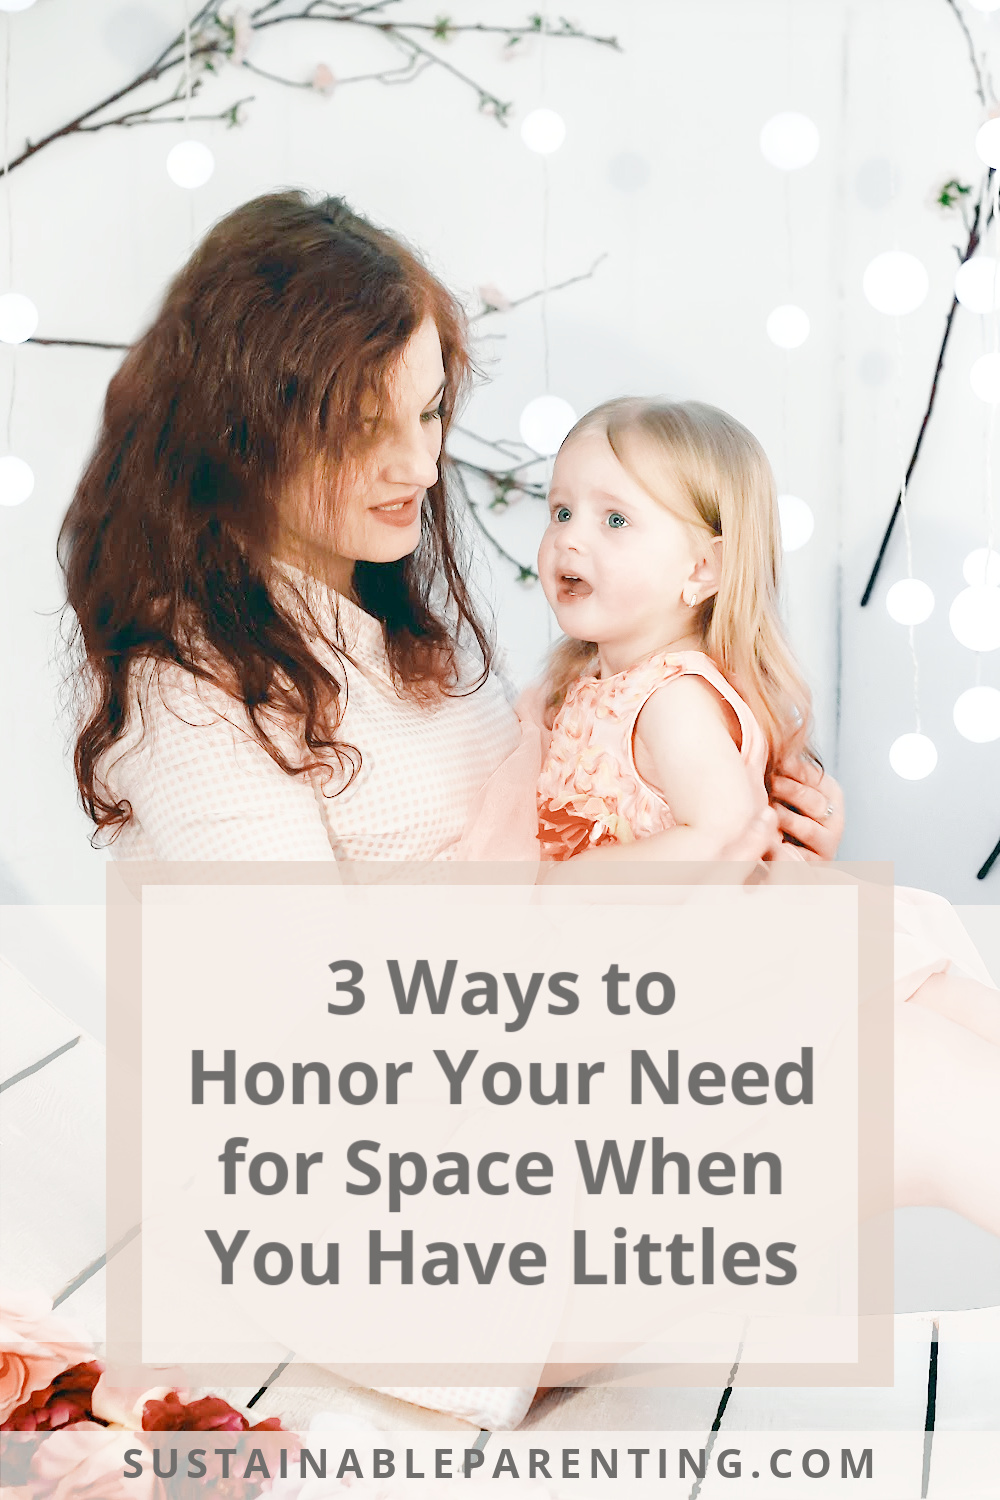 3 Ways To Honor Your Need For Space When You Have Littles